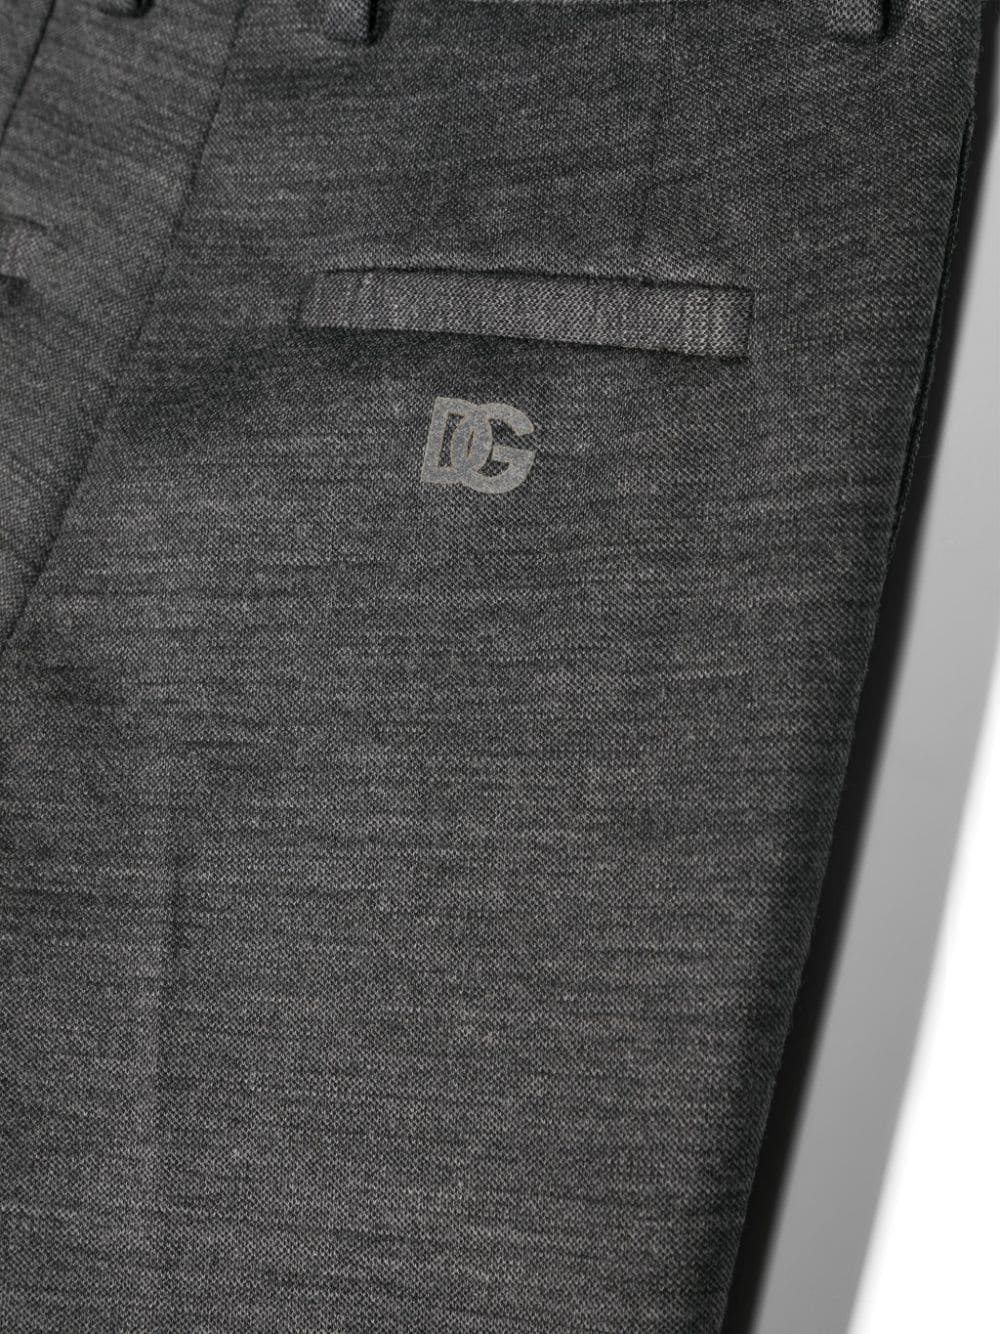 Gray children's trousers with logo